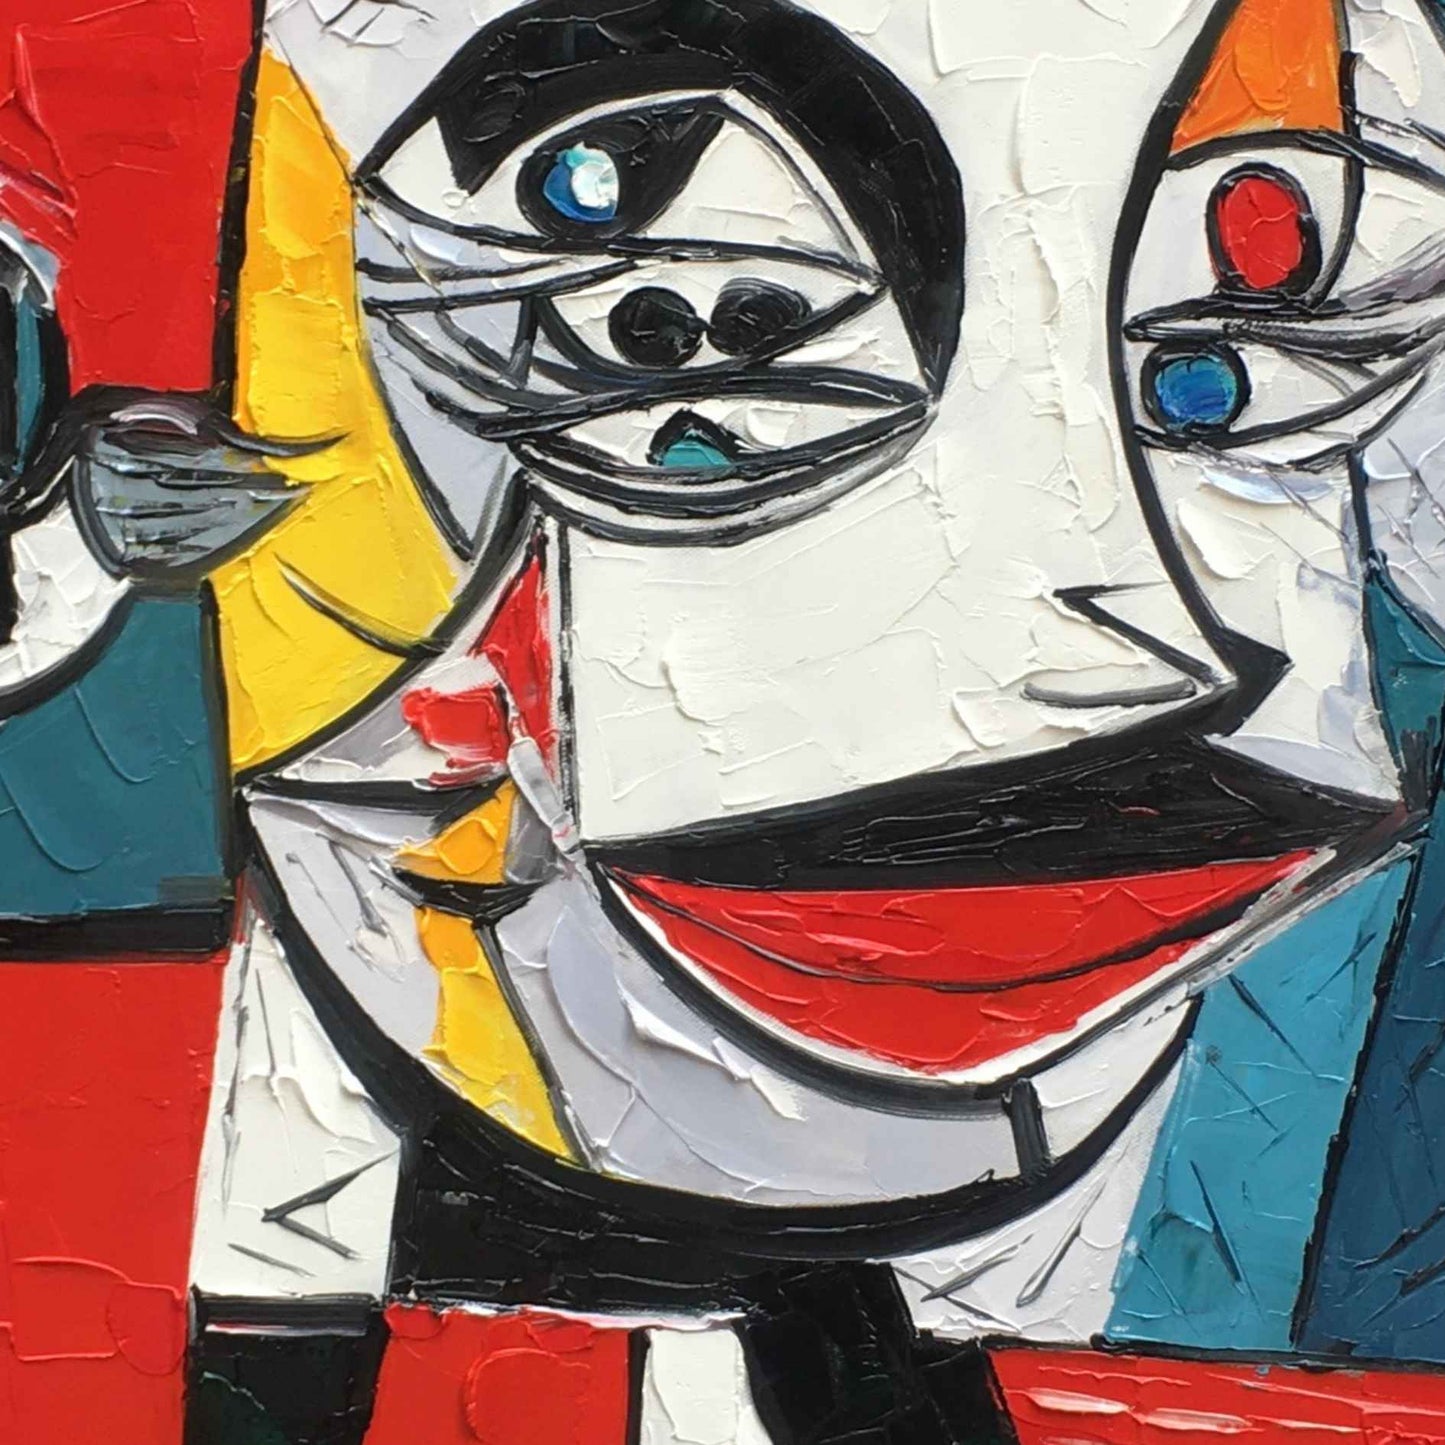 Picasso painting Face 120x72 cm